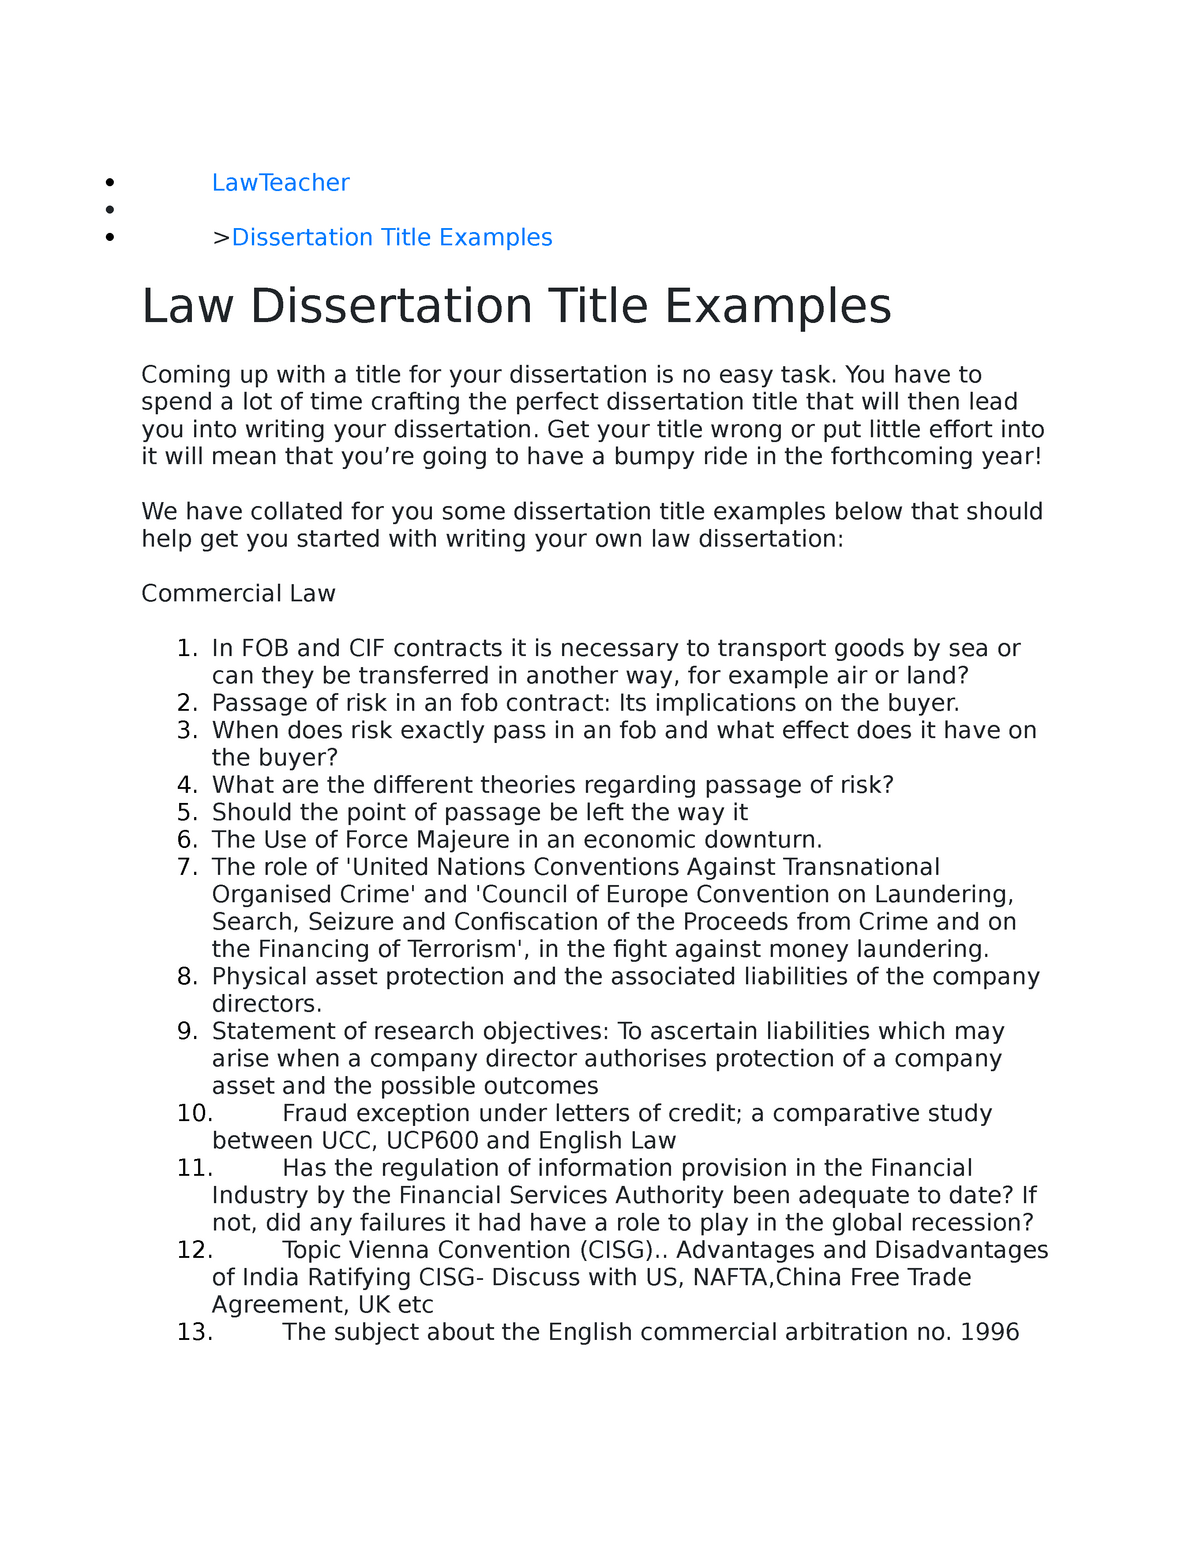 Dissertation titles examples methodology in a dissertation